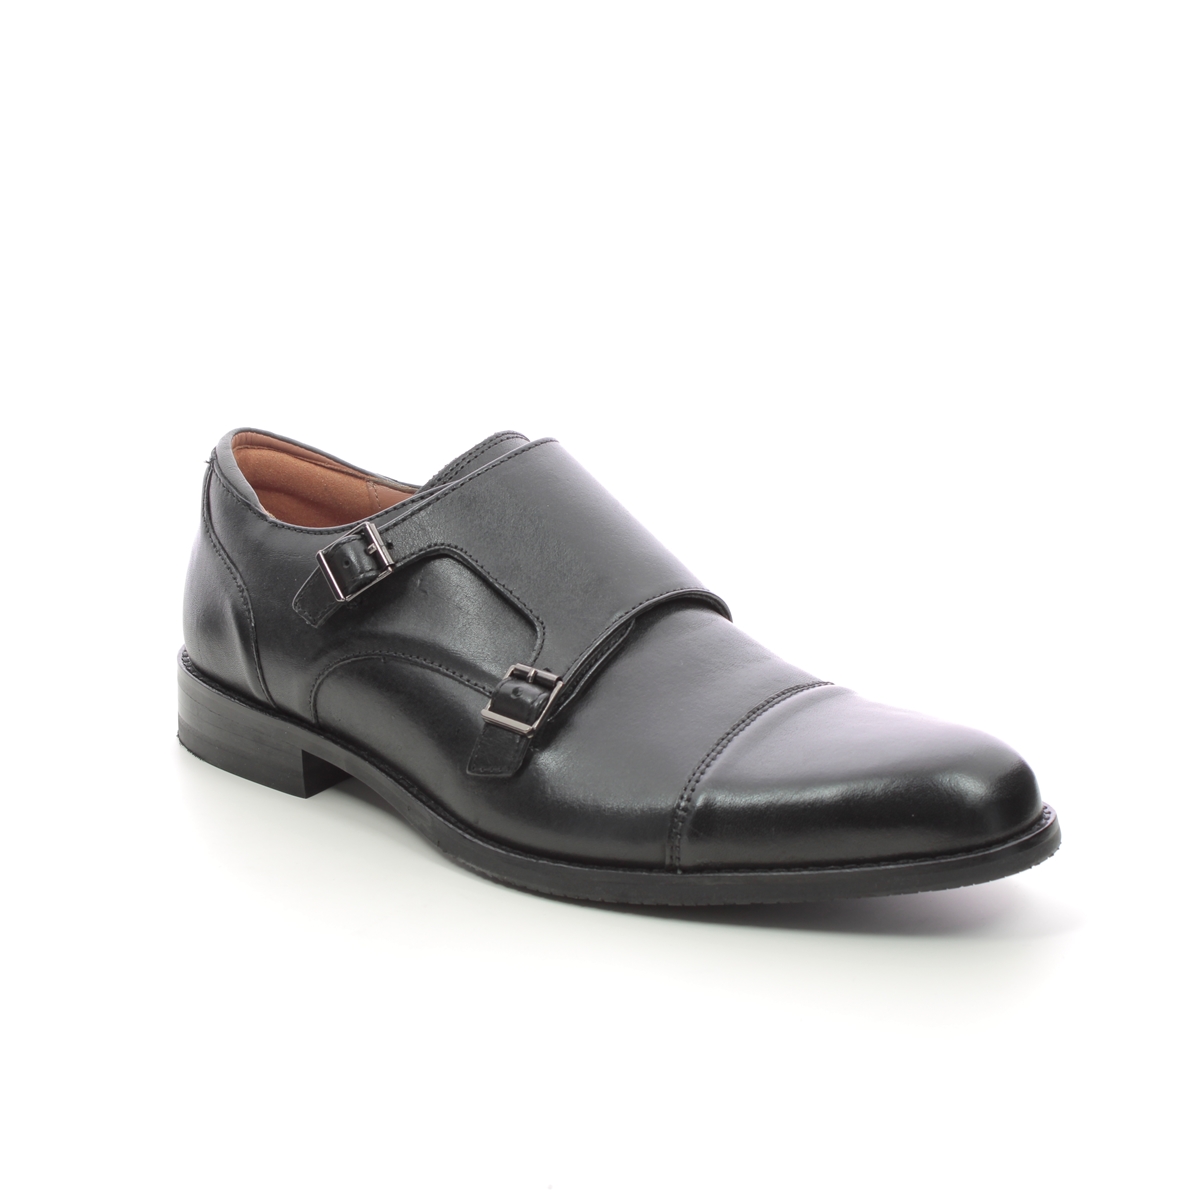 Clarks Craftarlo Monk Black Leather Mens Formal Shoes 724517G In Size 10 In Plain Black Leather G Width Fitting